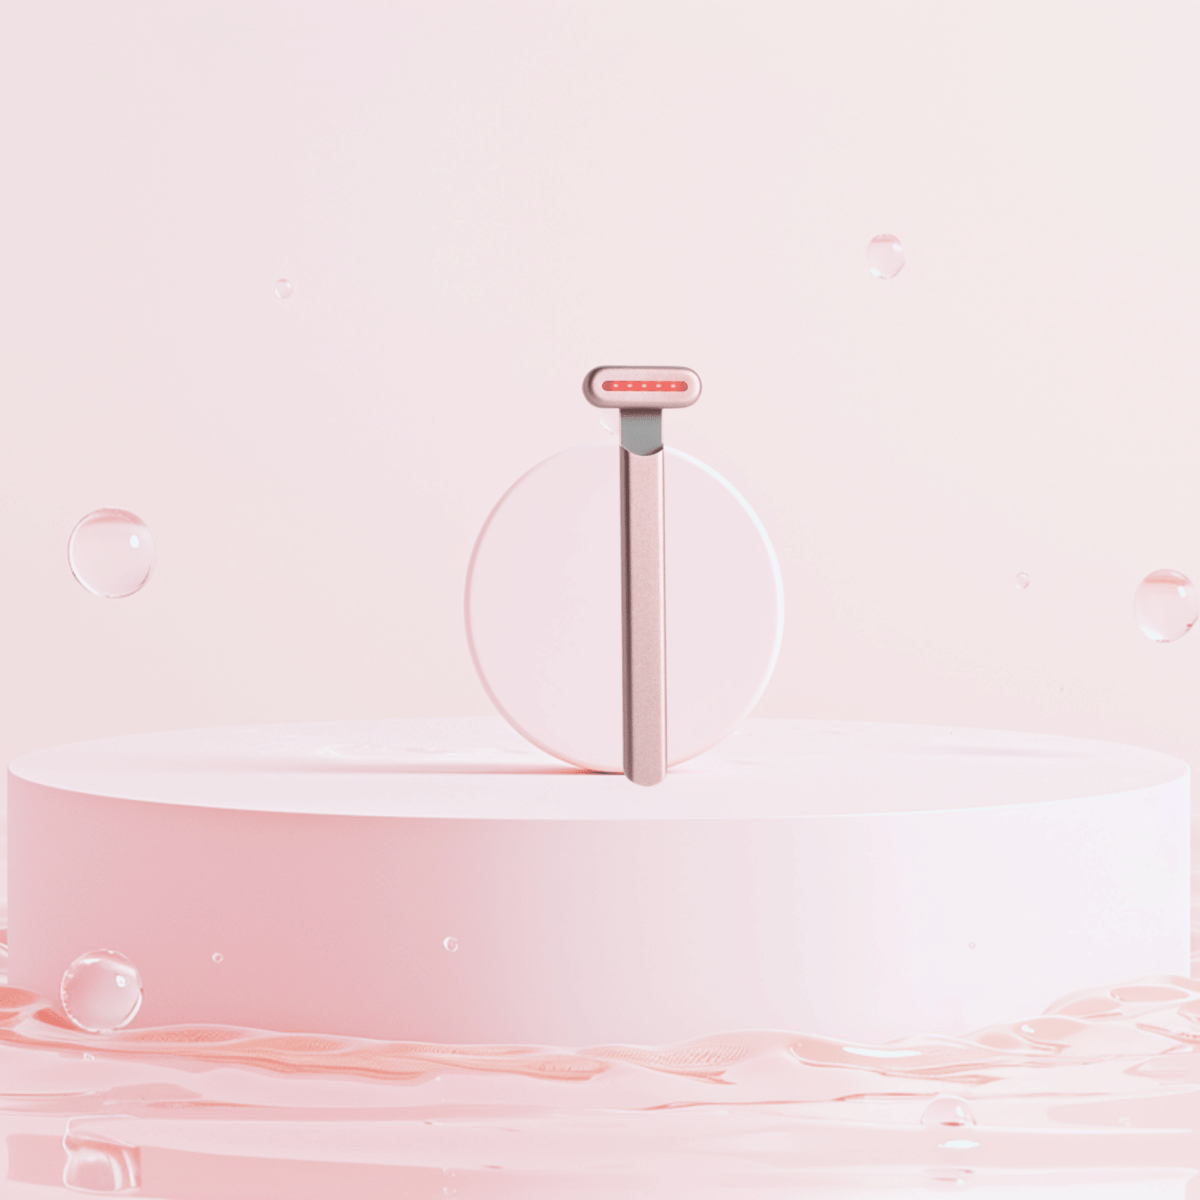 LED redlight therapy wand on pink podium that is suspended in water